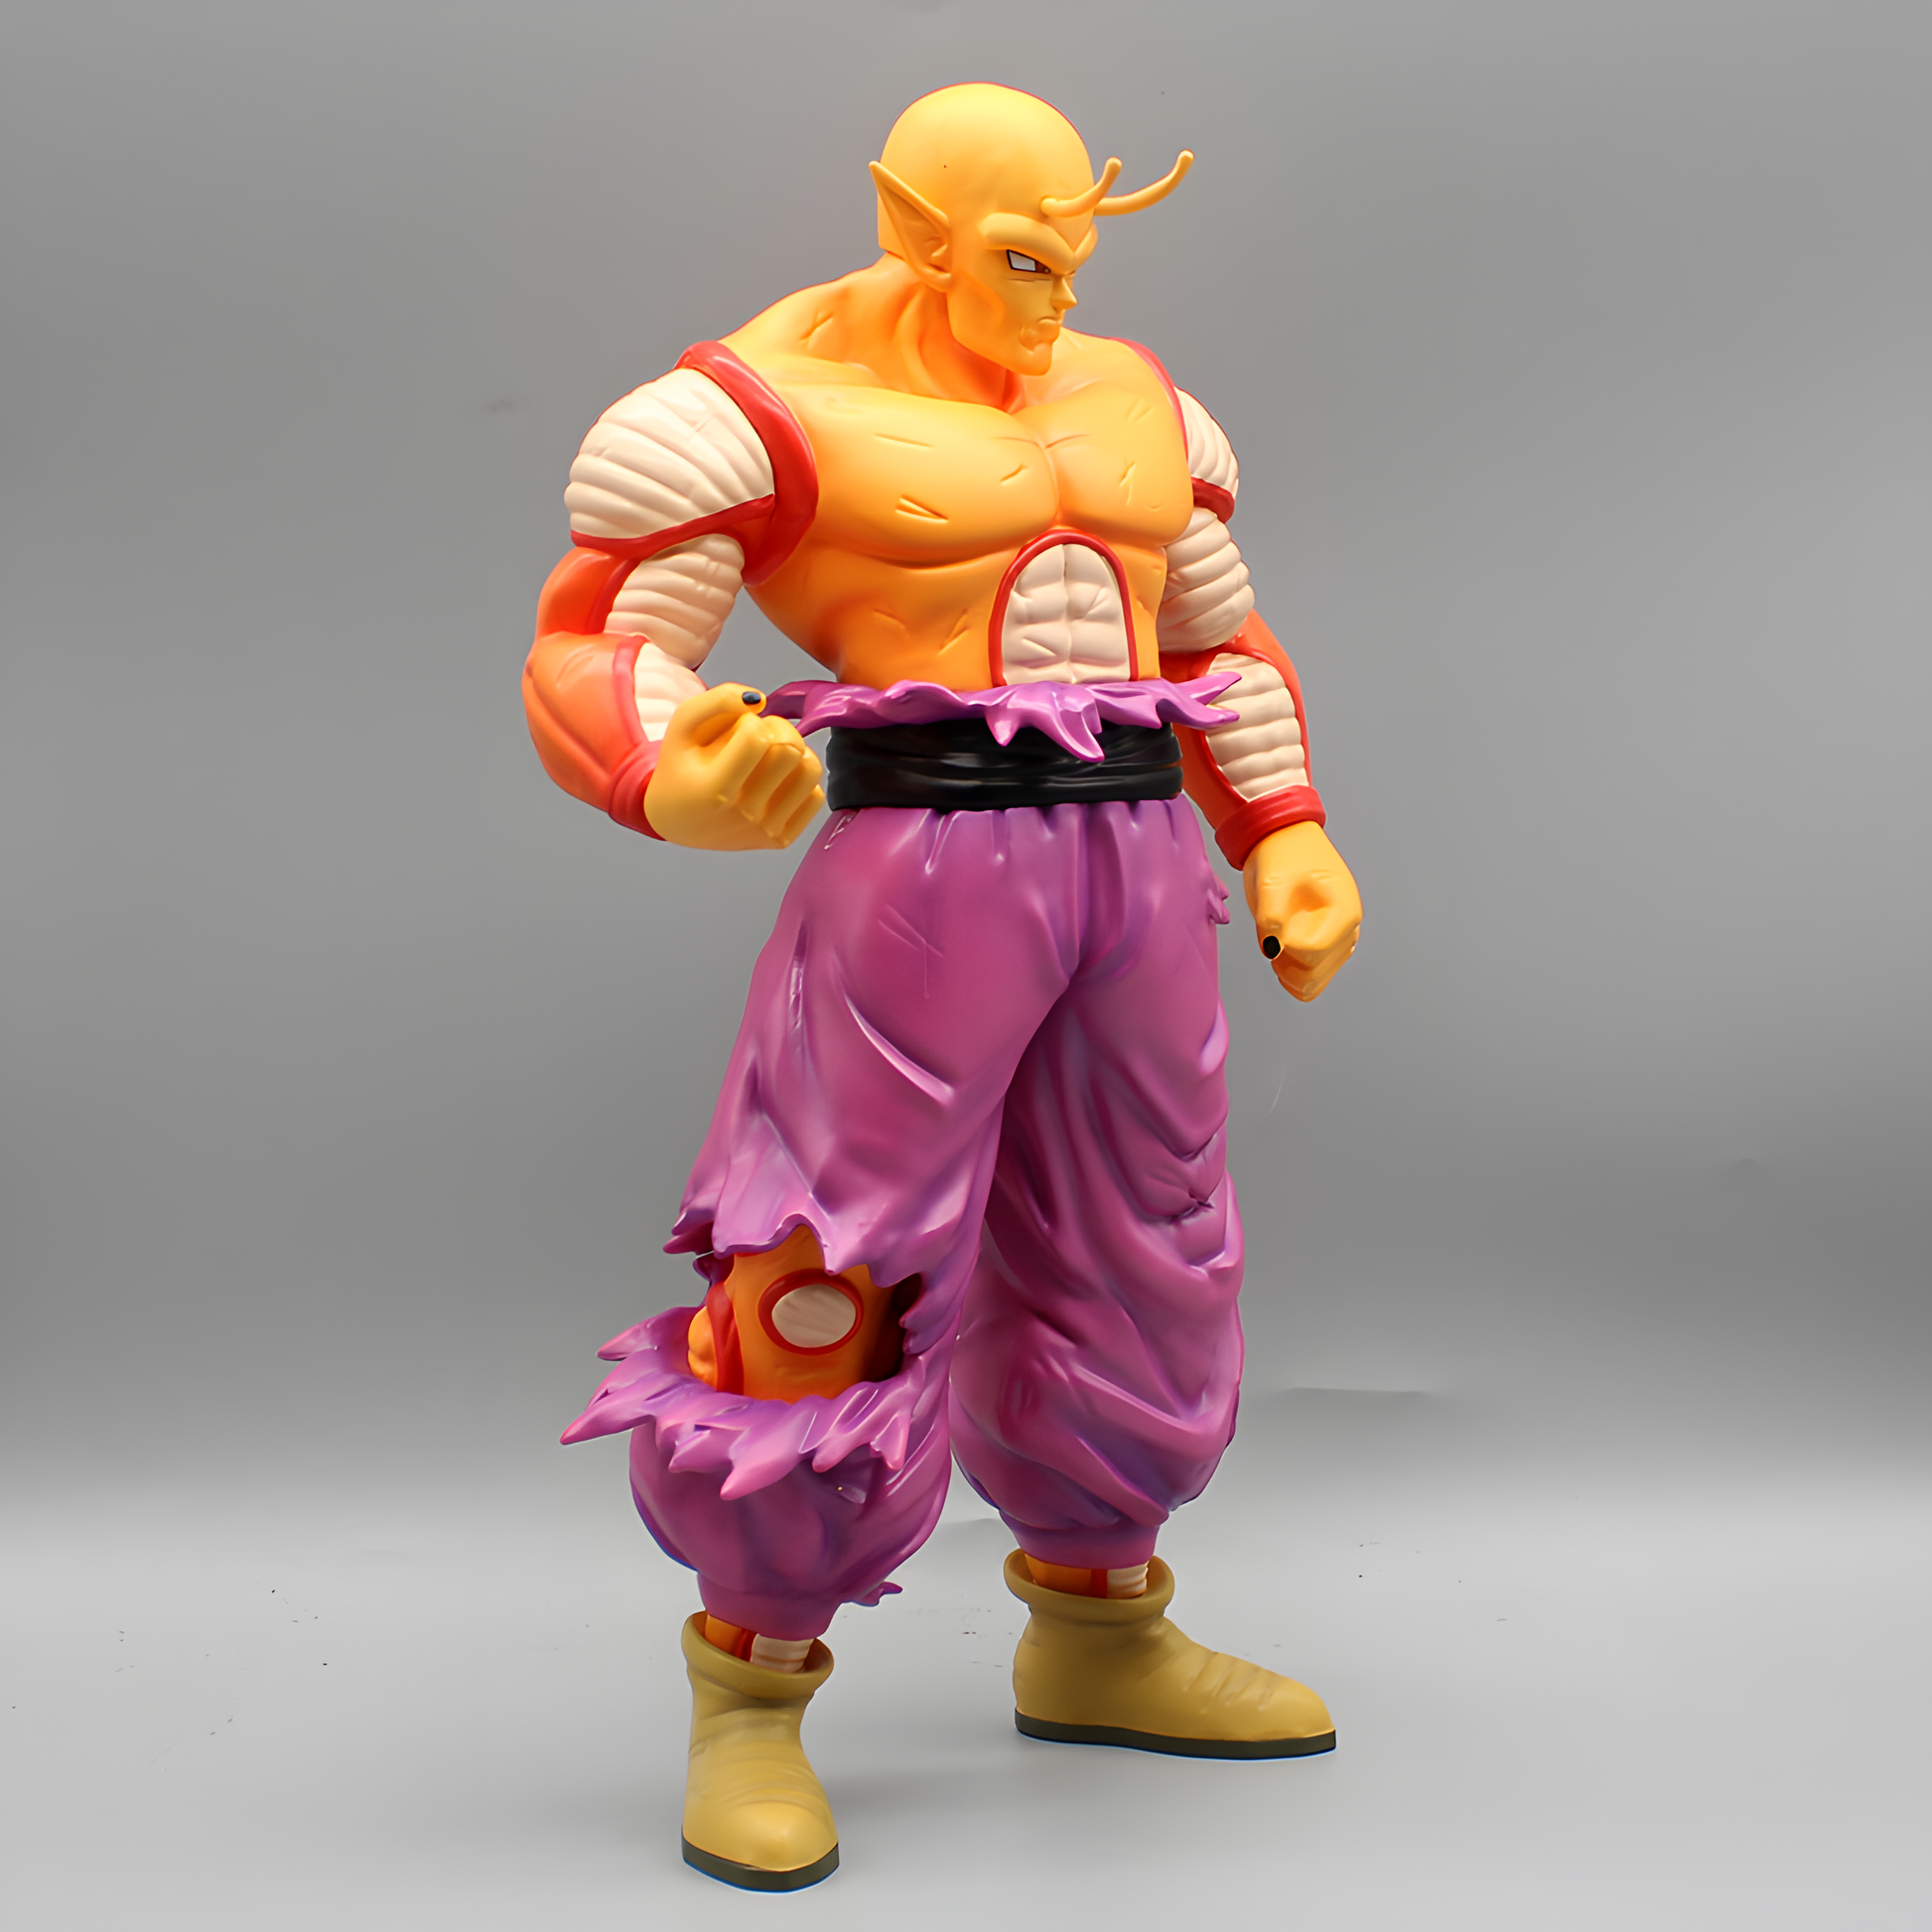 Dynamic angle of Piccolo Dragon Ball collectible showcasing his muscular build and iconic outfit, with a focus on the textured details of his purple pants.